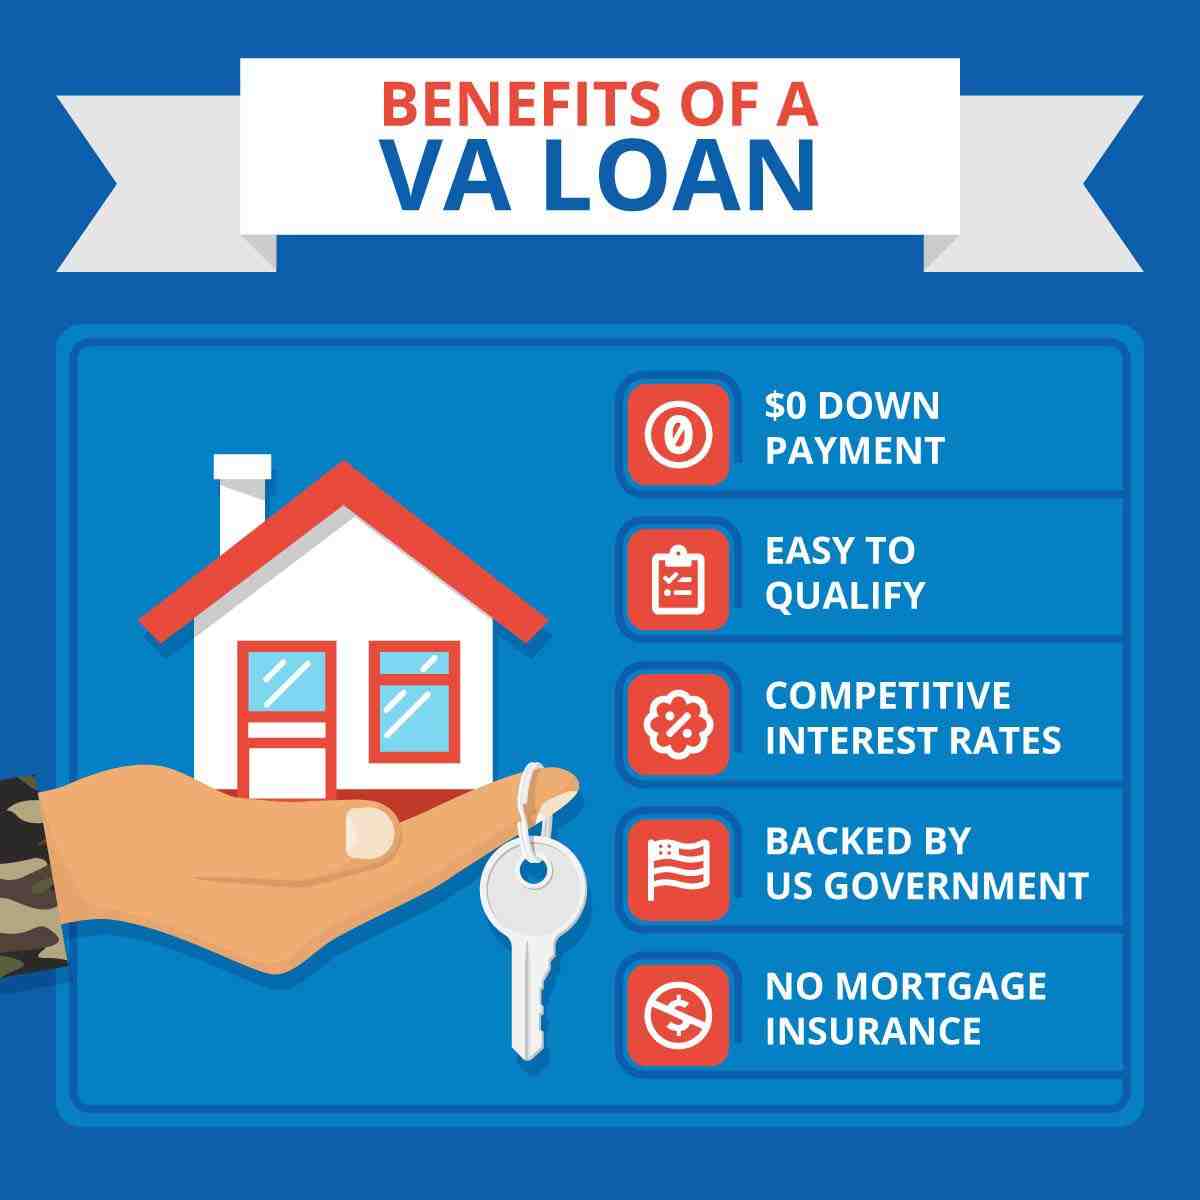 What are the pros and cons of a VA loan?